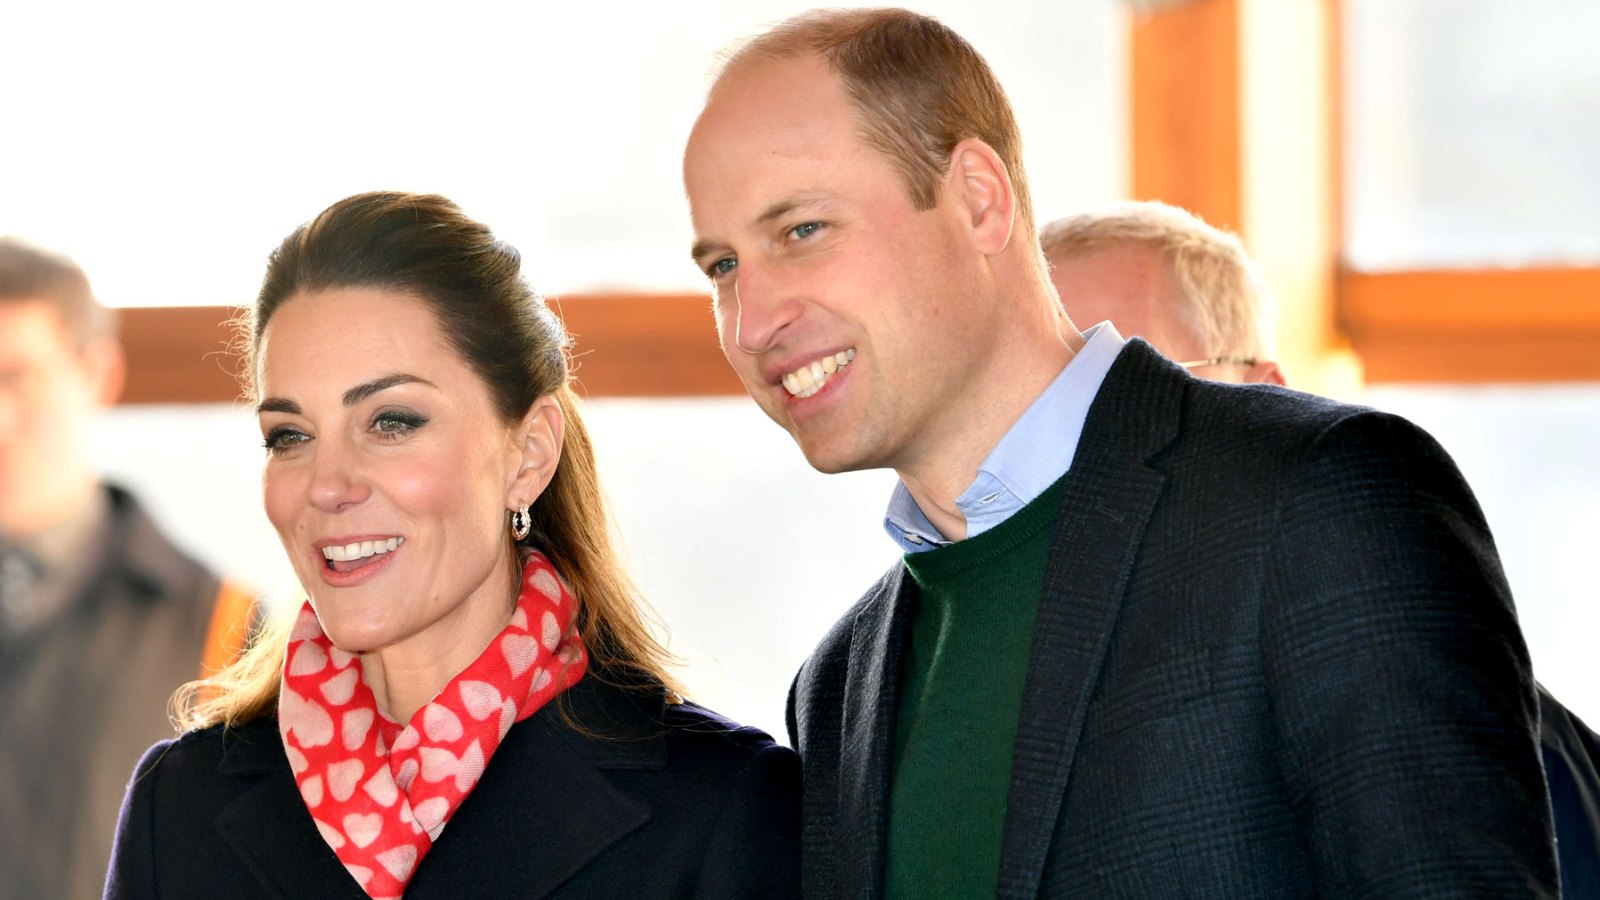 Prince William and Duchess Kate’s ‘Hectic Schedule’ After Family Drama Has ‘Brought Them Closer Together’